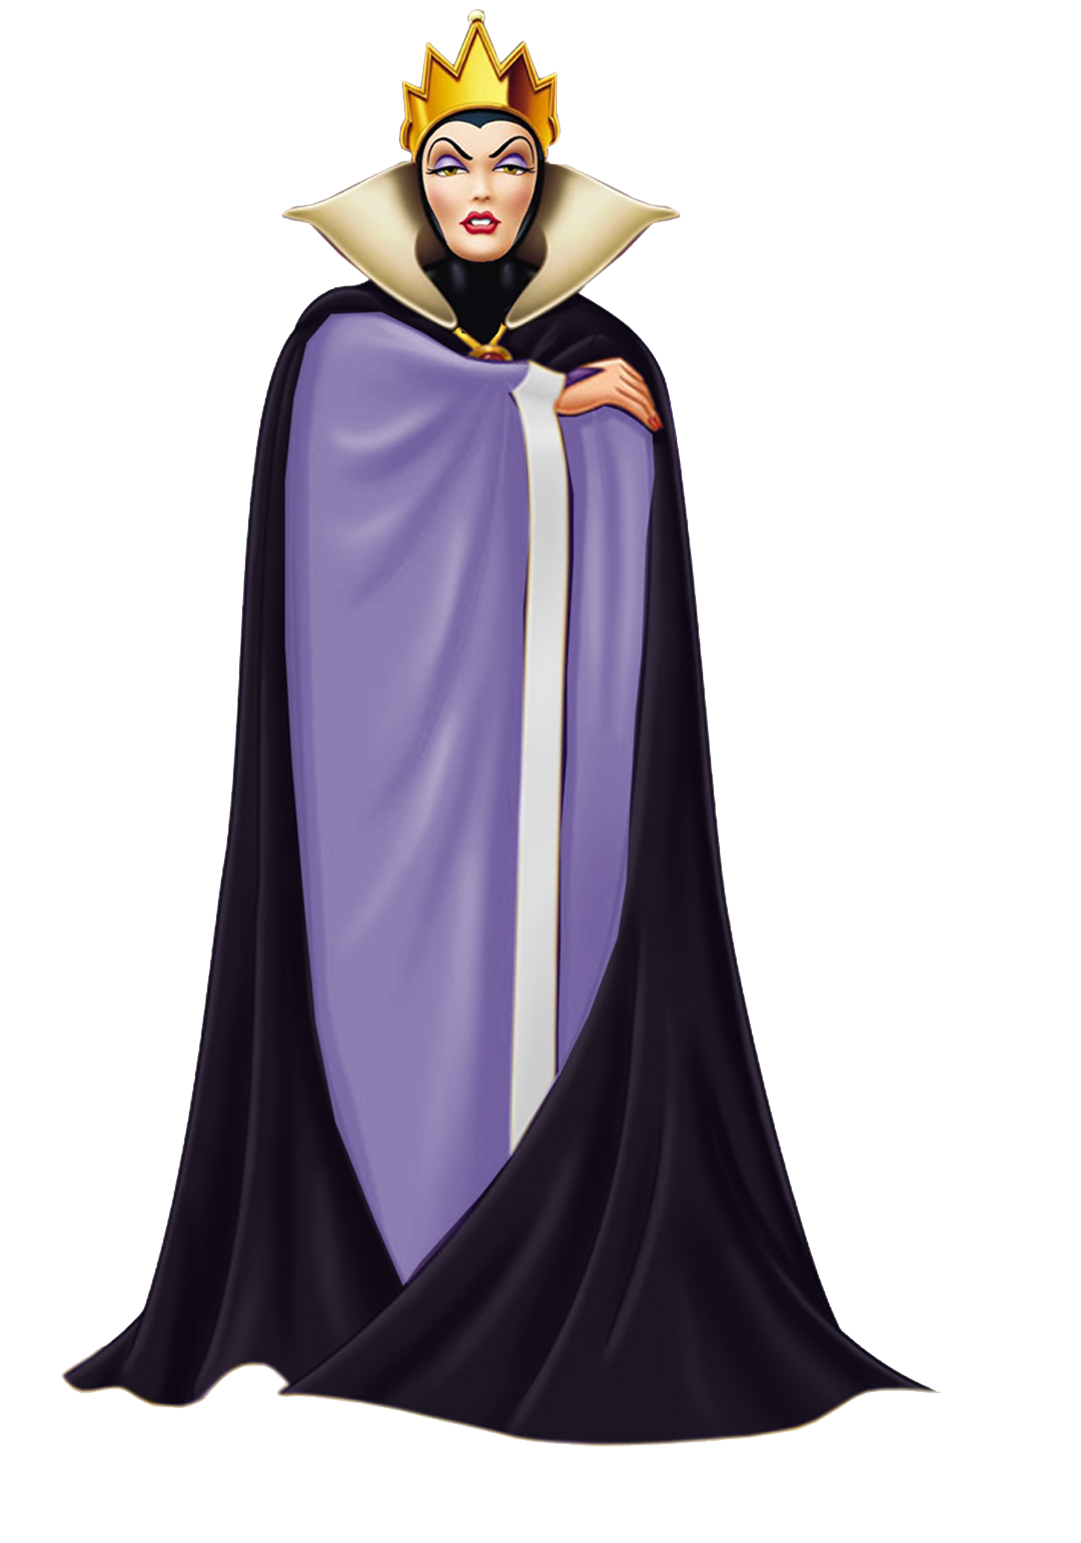 Download PNG image - Queen Transparent Background 